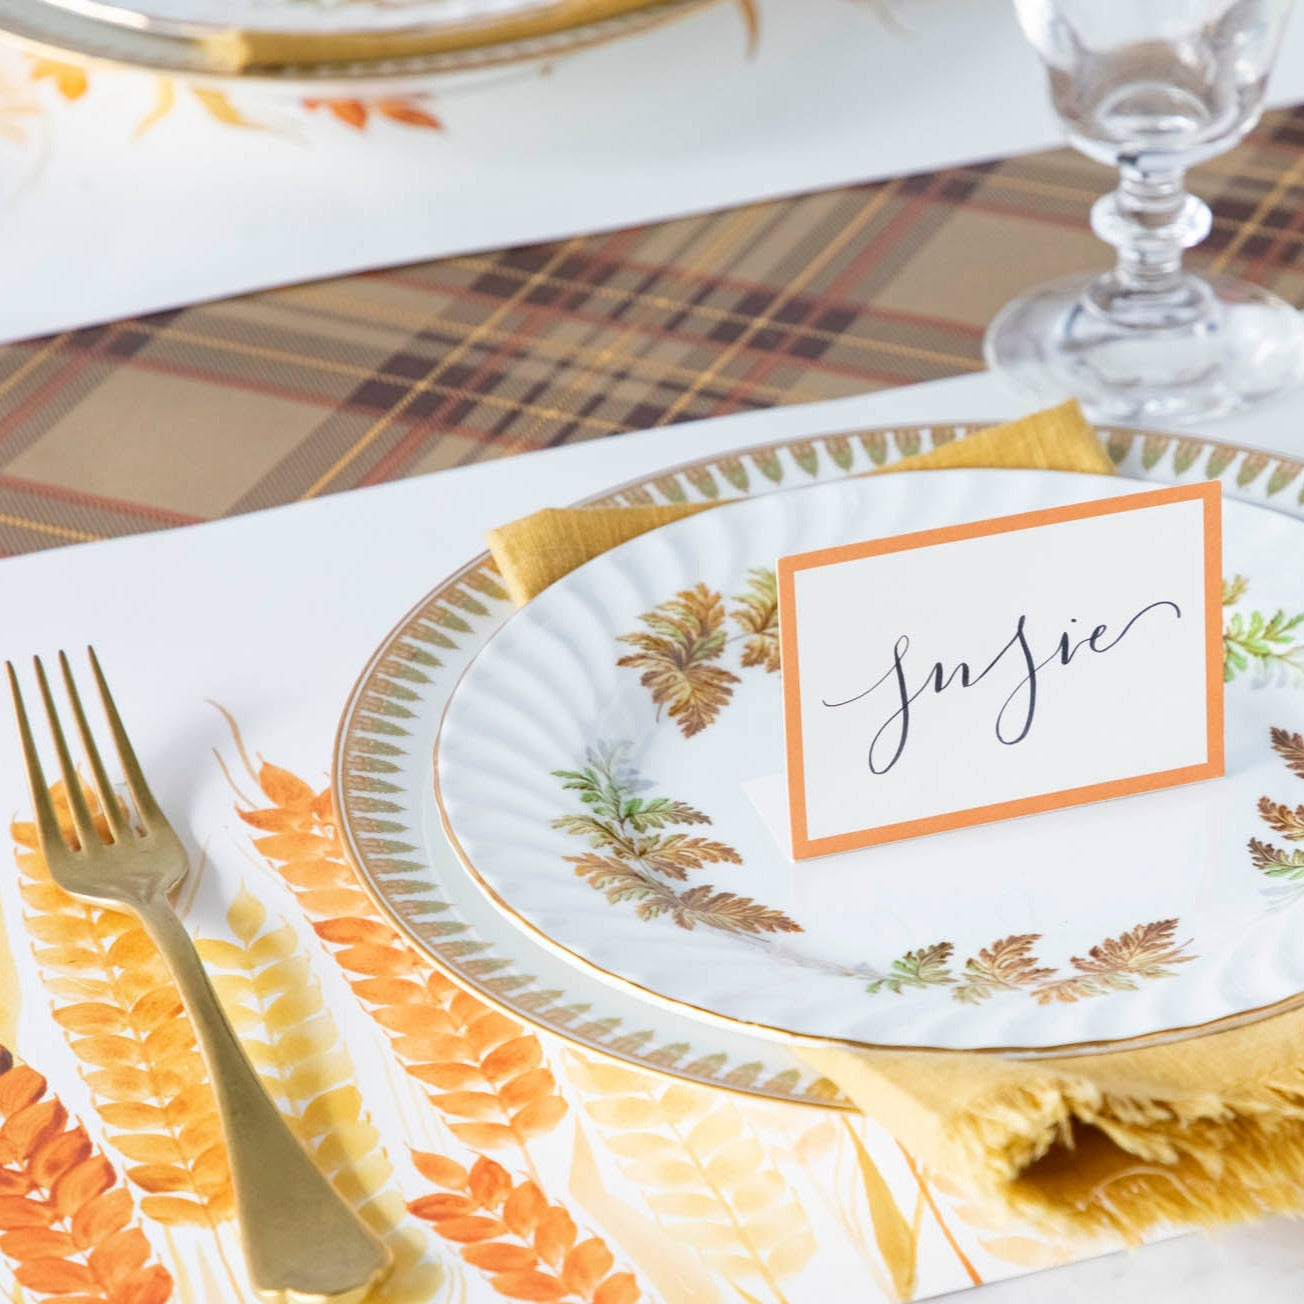 Close-up of the Golden Wheat Placemat under a fall themed place setting.